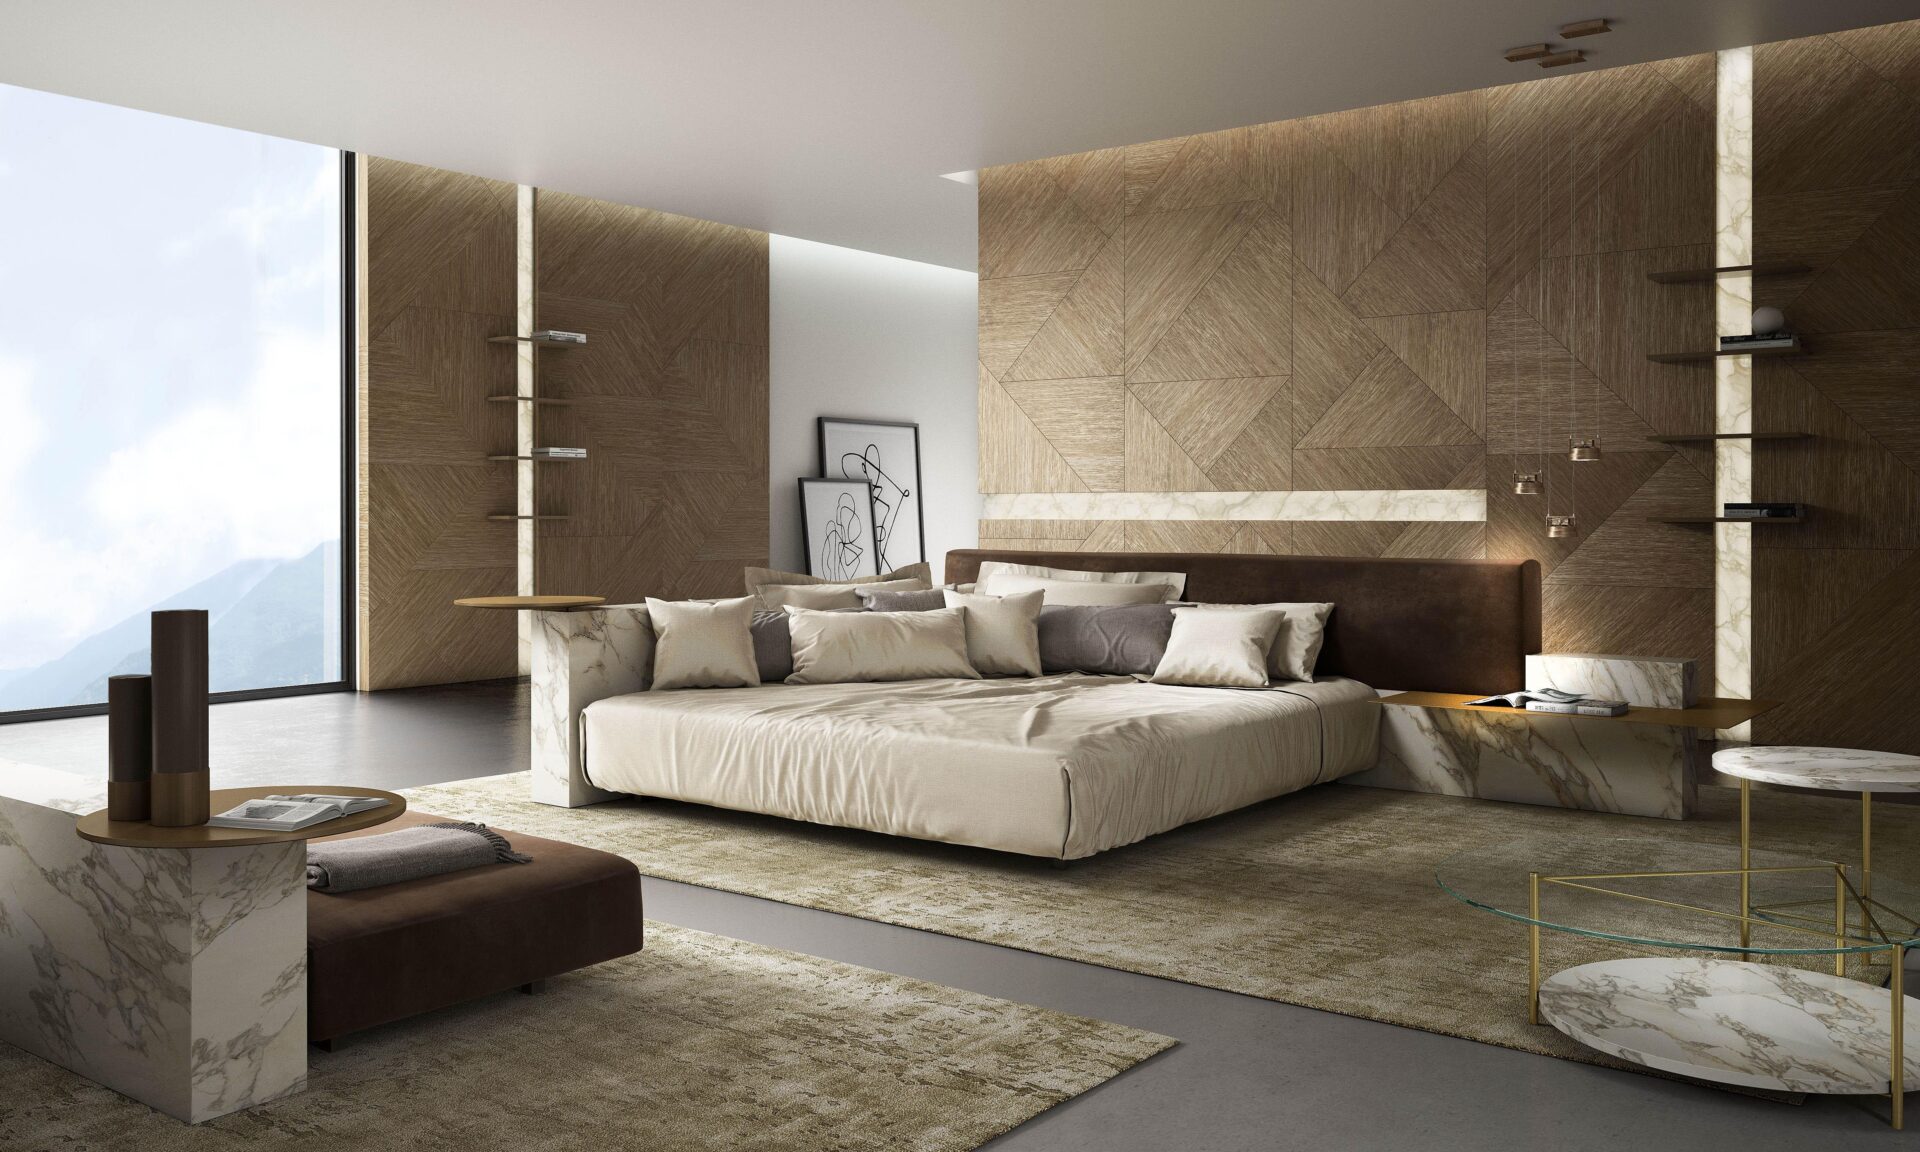 Materia Collection bedroom design